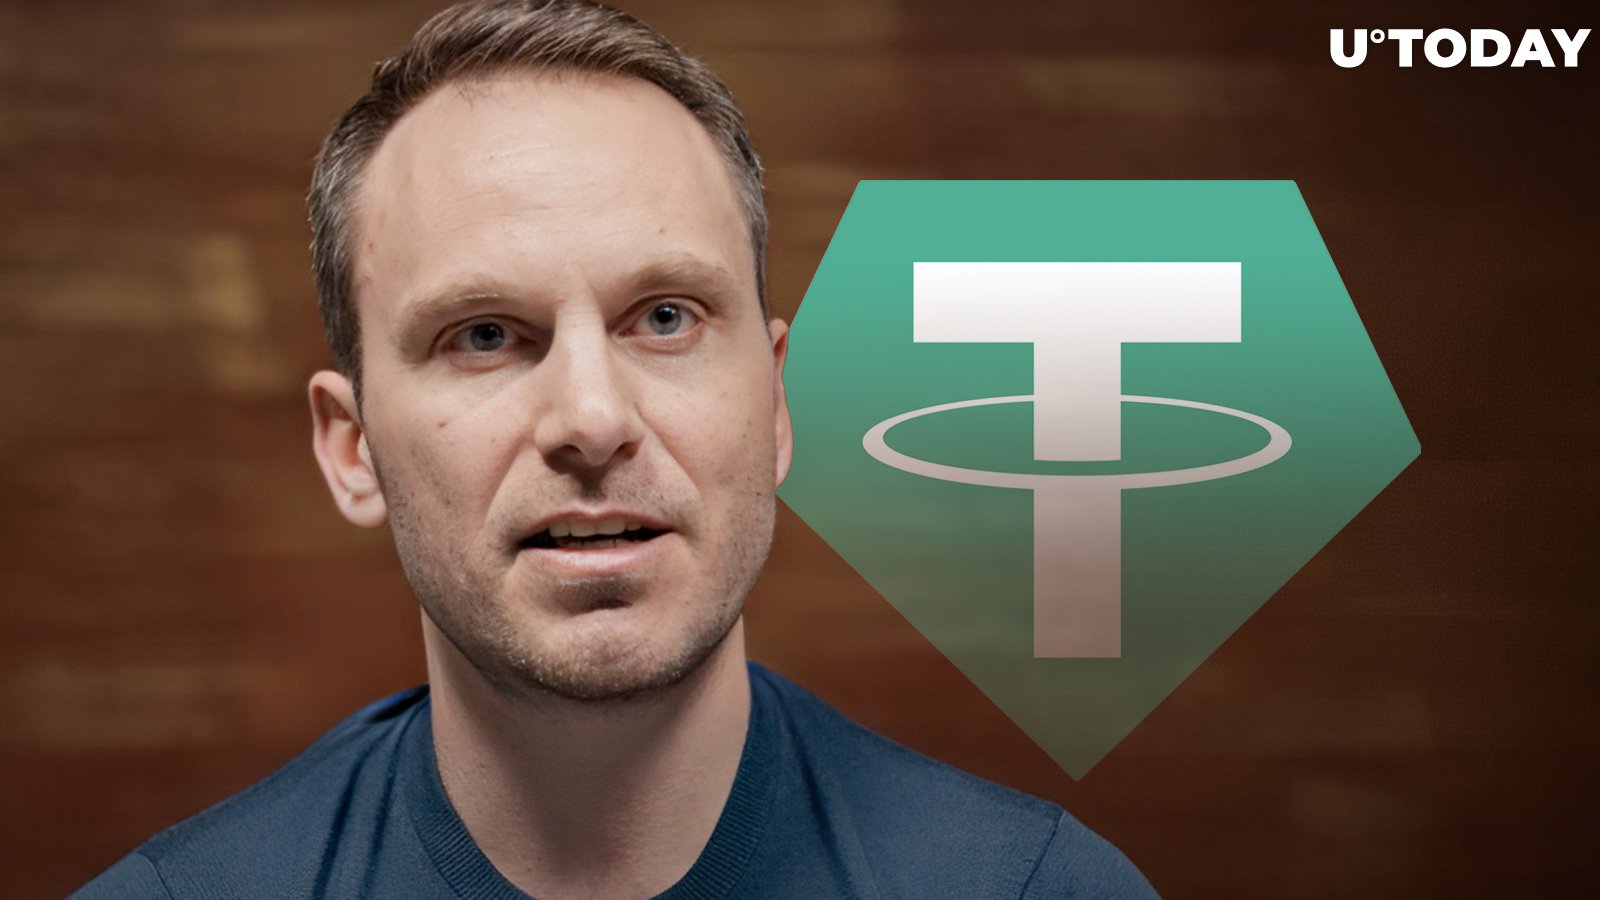 Did Tether Spokesperson Just Confirm Major Conspiracy?